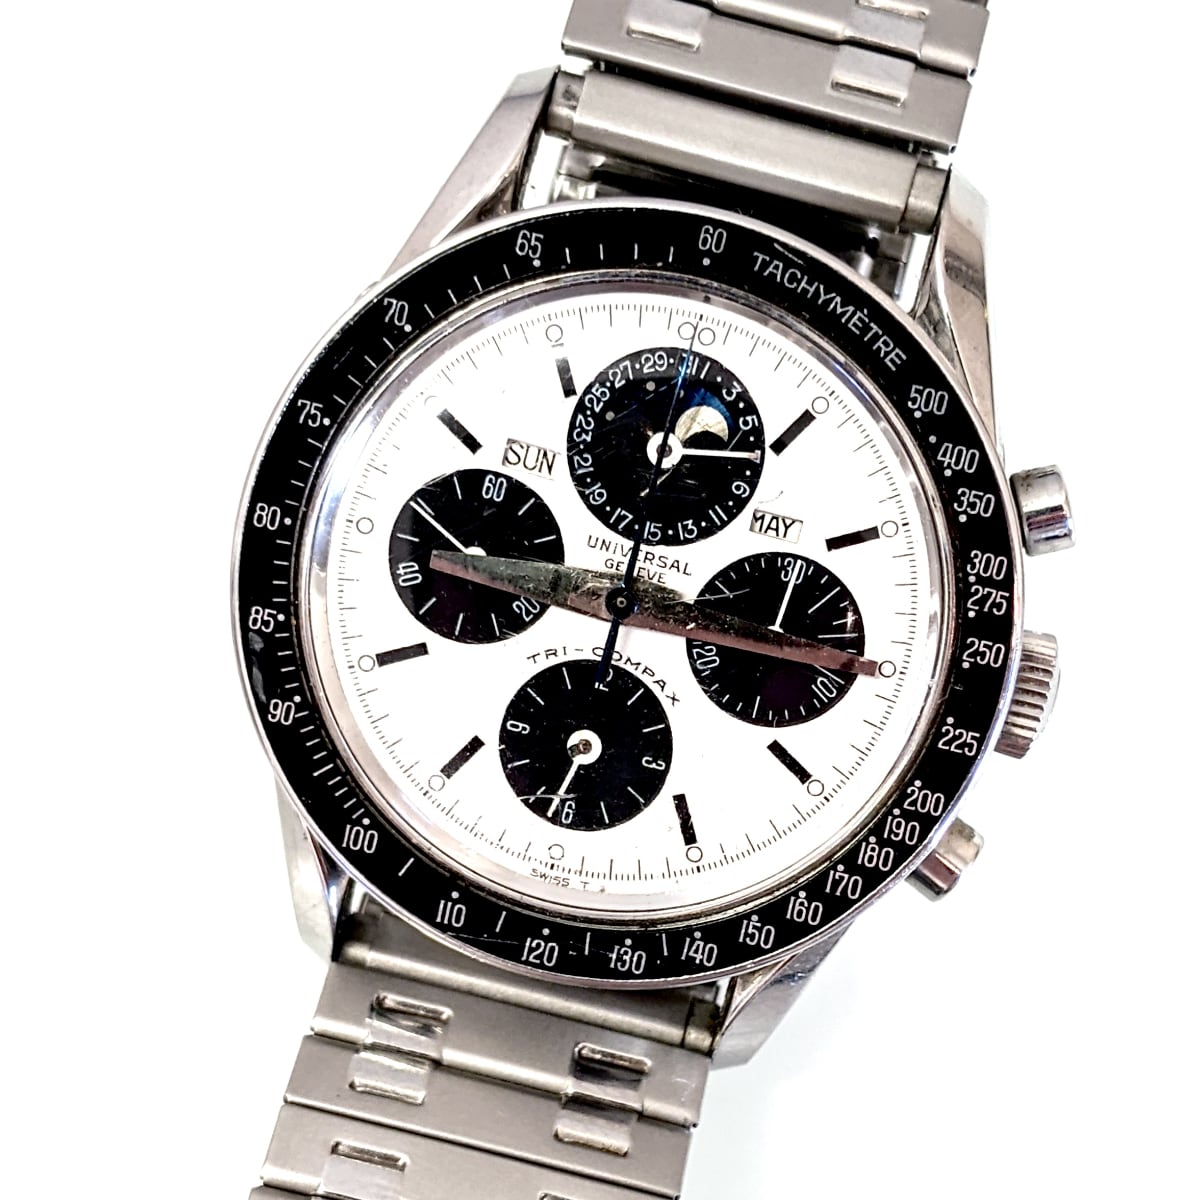 Expensive silver watch with white face